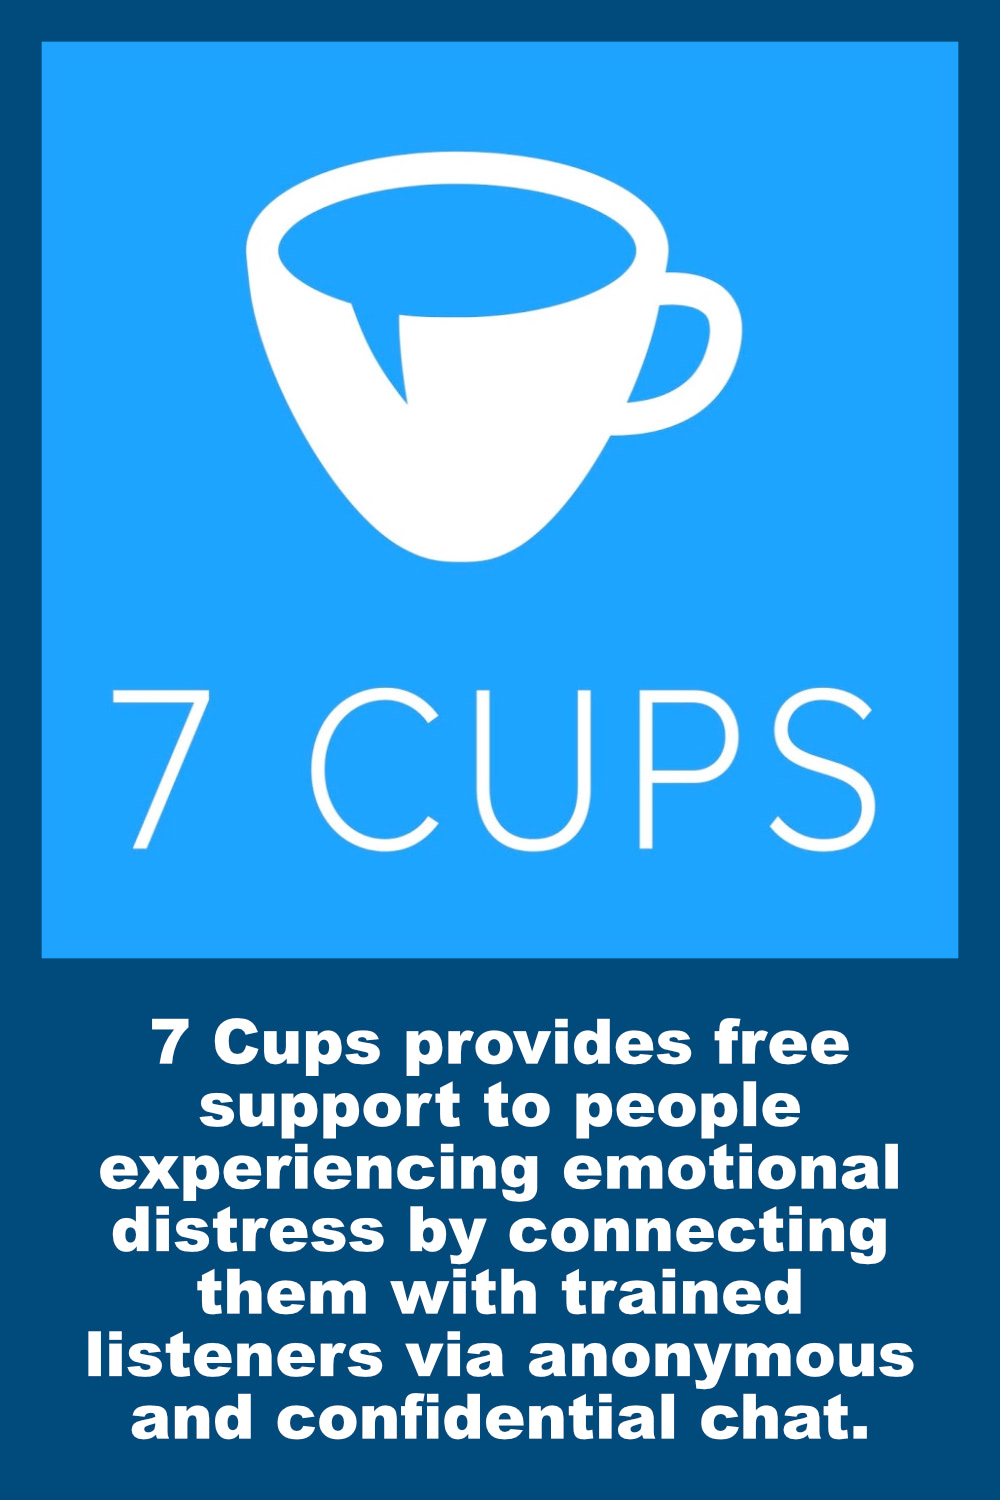 7 Cups provides free support to people experiencing emotional distress by connecting them with trained listeners via anonymous and confidential chat.